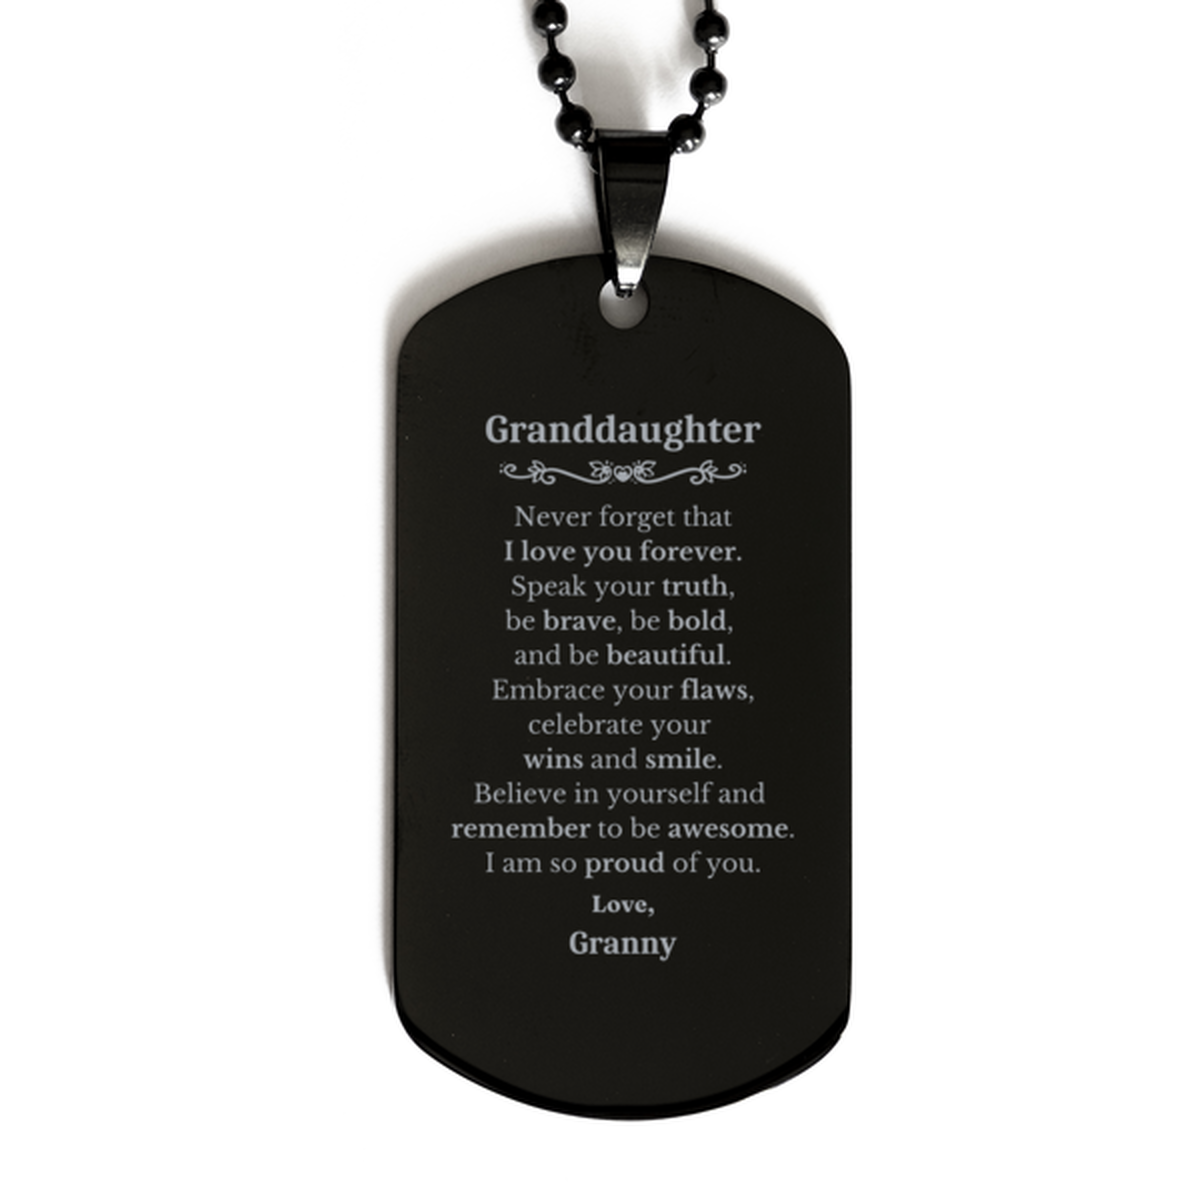 Granddaughter Black Dog Tag, Never forget that I love you forever, Inspirational Granddaughter Birthday Unique Gifts From Granny